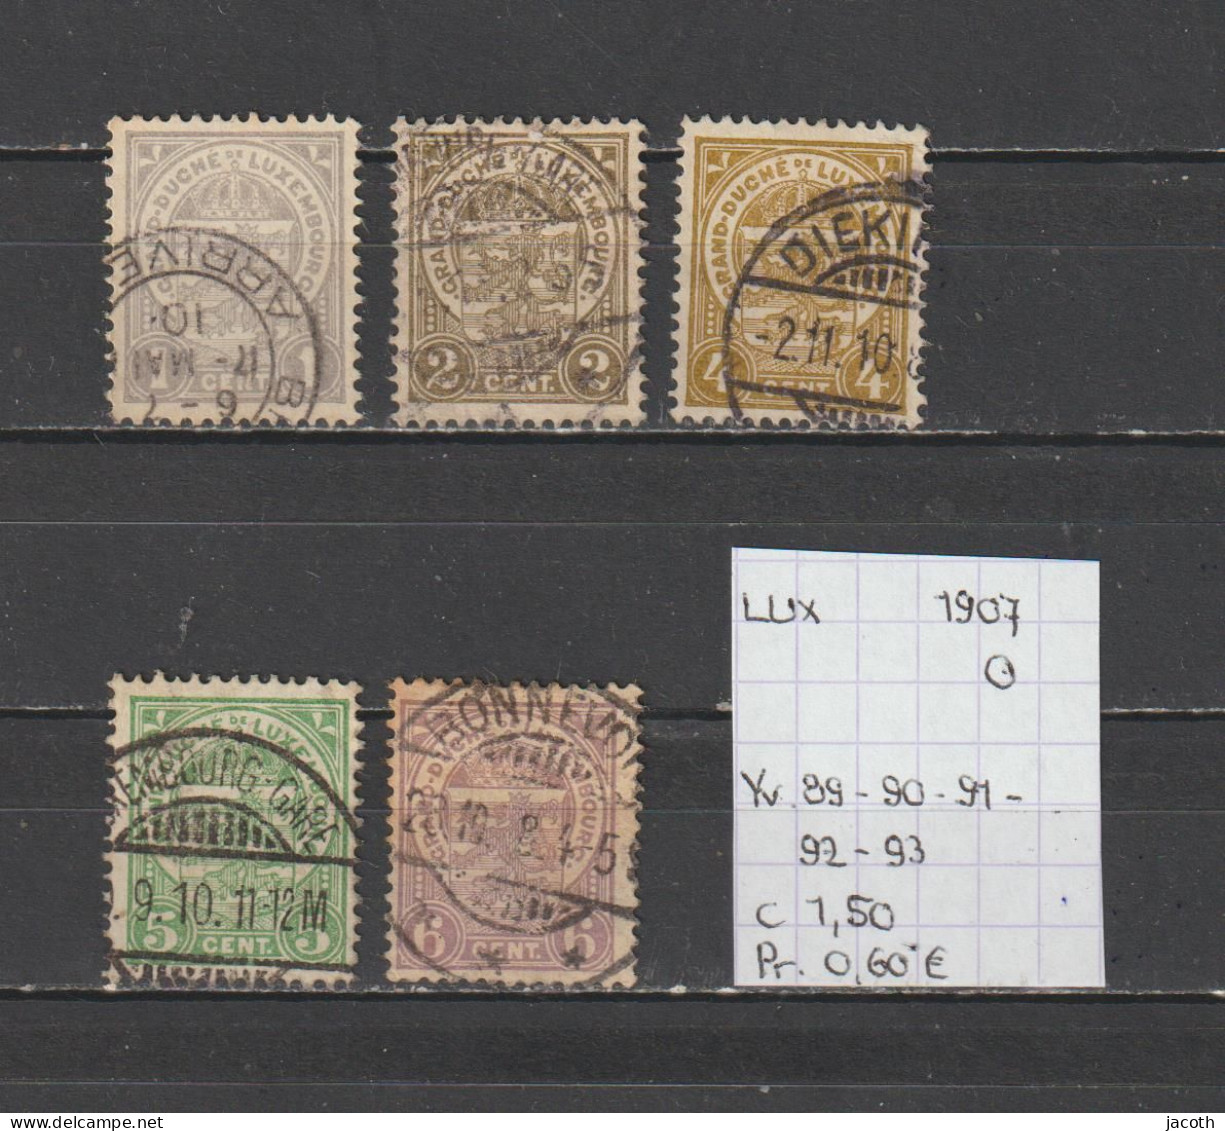 (TJ) Luxembourg 1907 - YT 89 + 90 + 91 + 92 + 93 (gest./obl./used) - 1907-24 Abzeichen